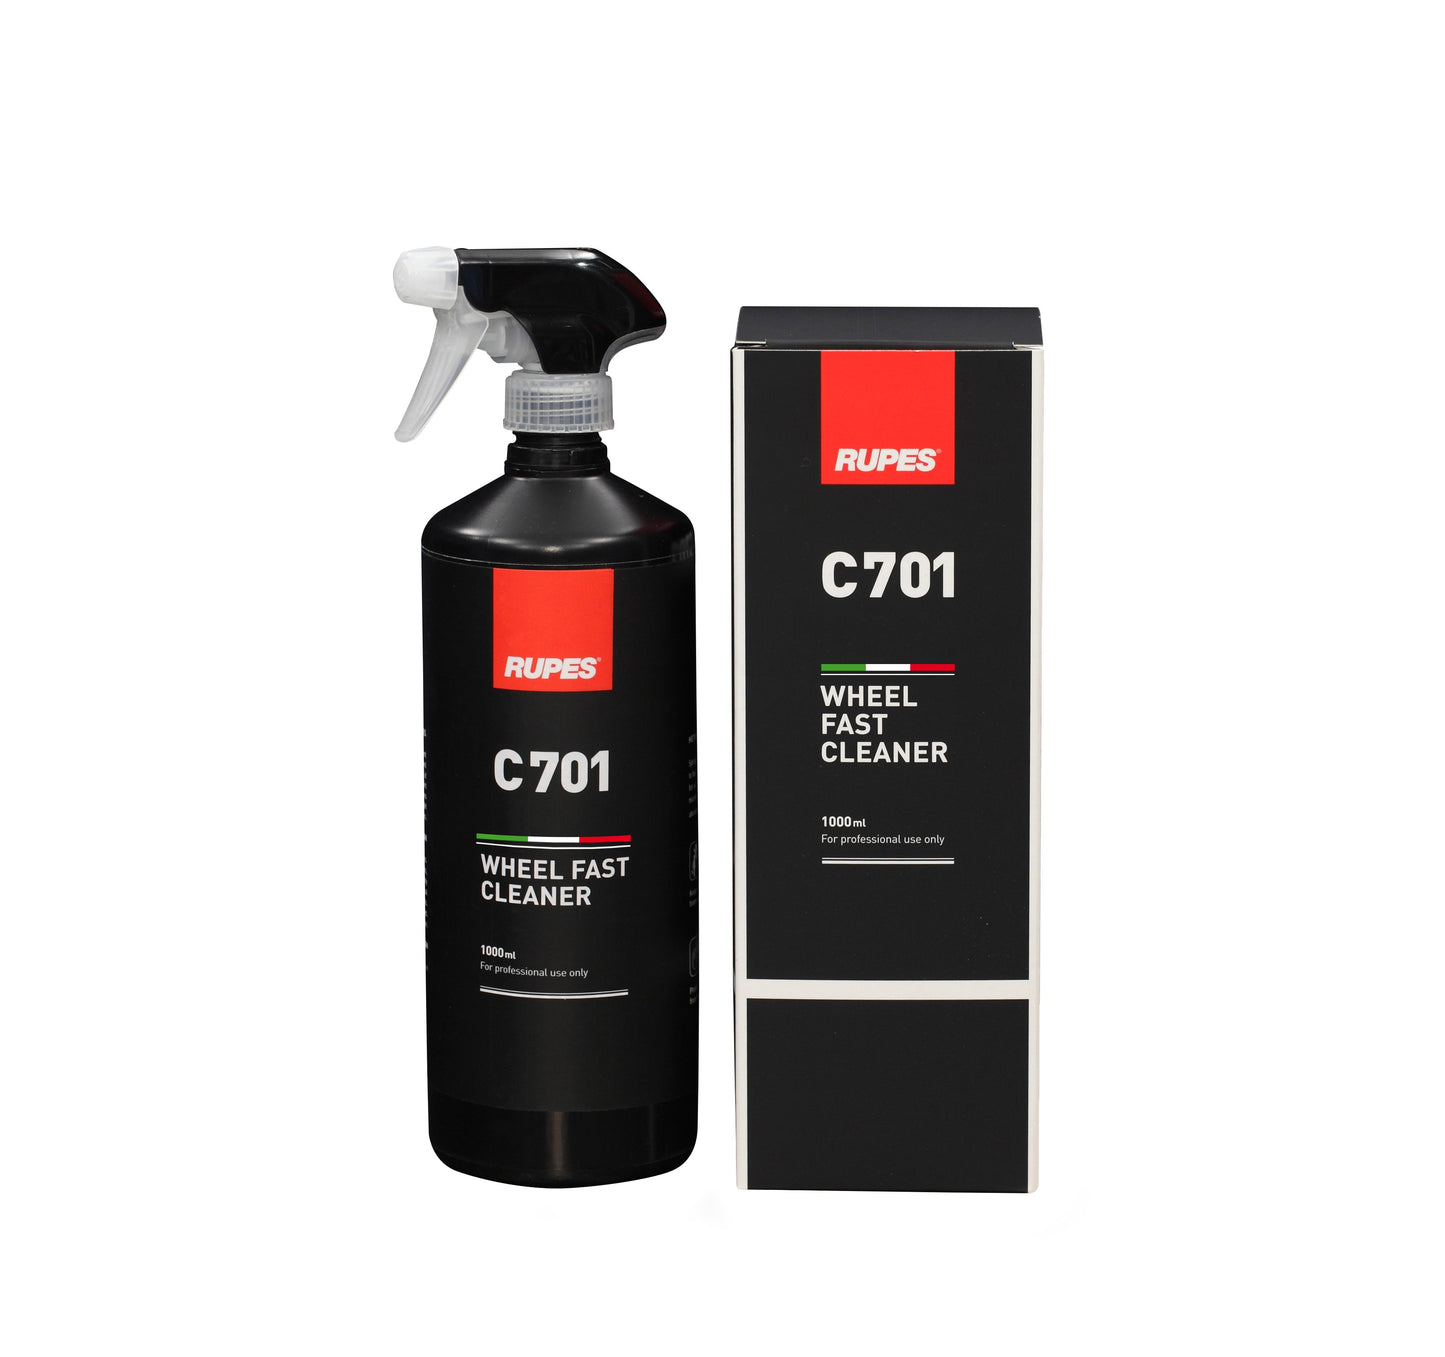 RUPES C701 FAST WHEEL CLEANER